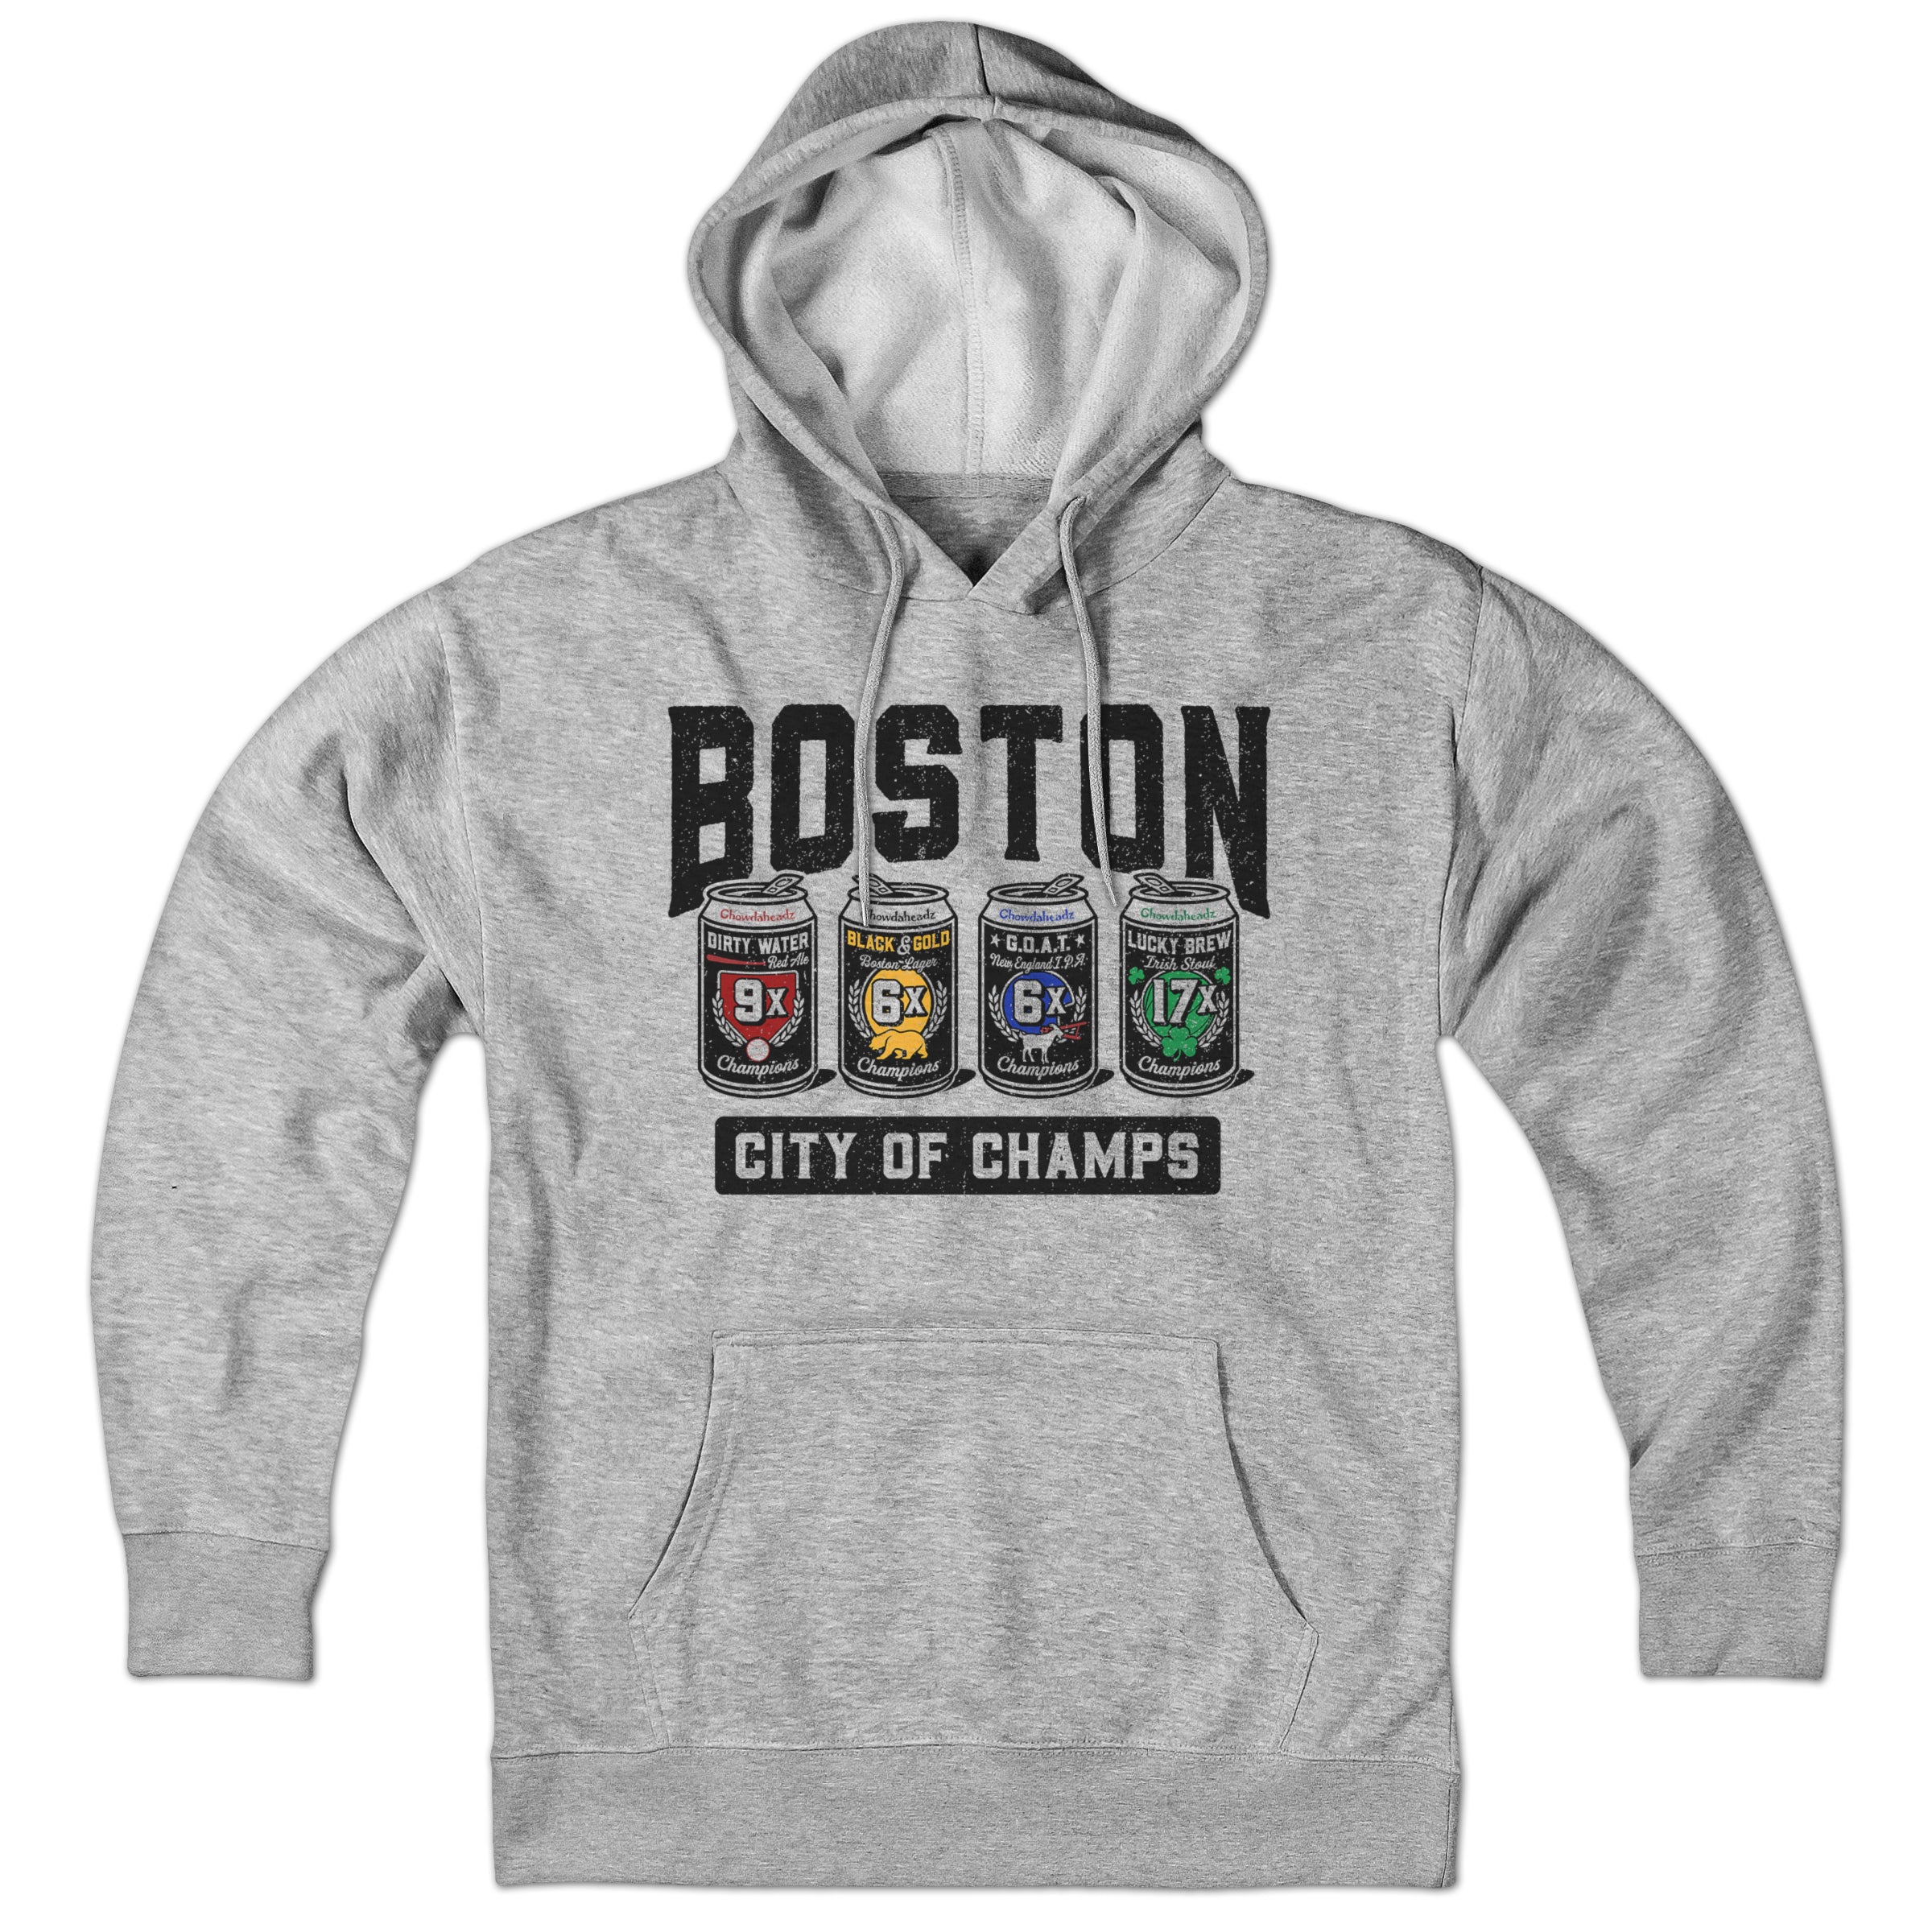 Boston red sox city connect shirt, hoodie, longsleeve, sweater